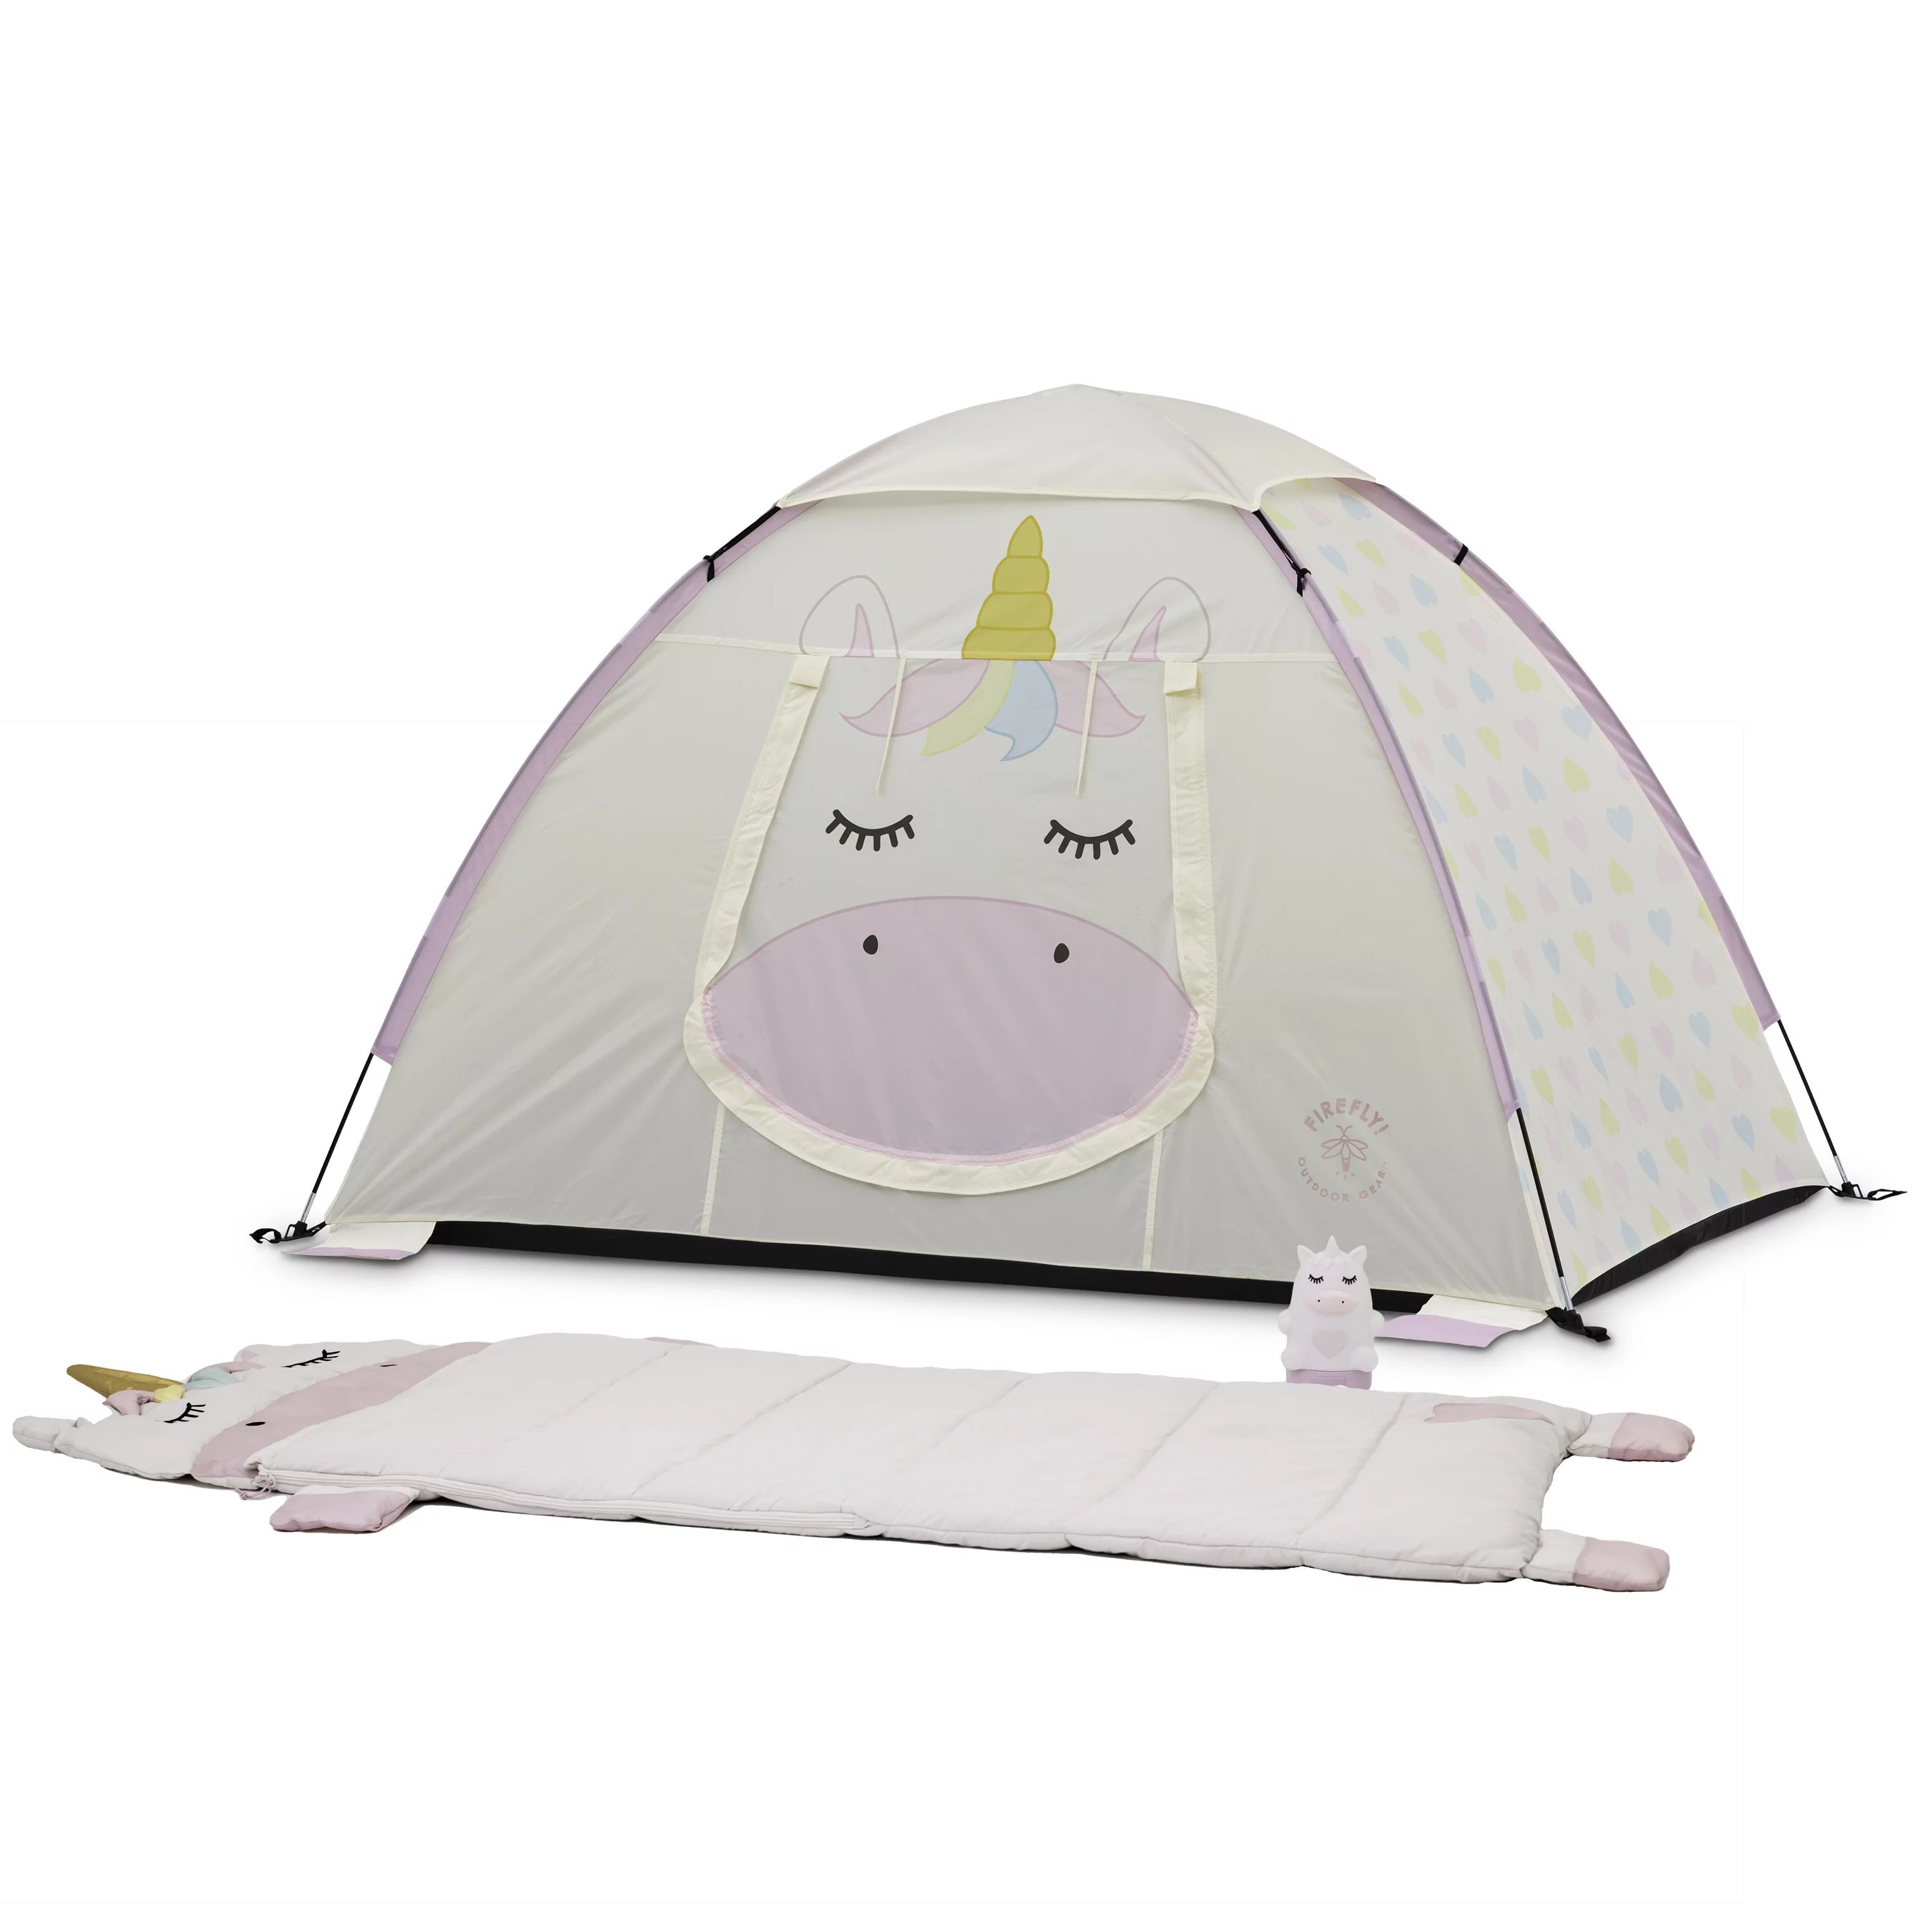 Firefly! Outdoor Gear Sparkle the Unicorn Kid's Camping Combo (One-room Tent, Sleeping Bag, Lante... | Walmart (US)